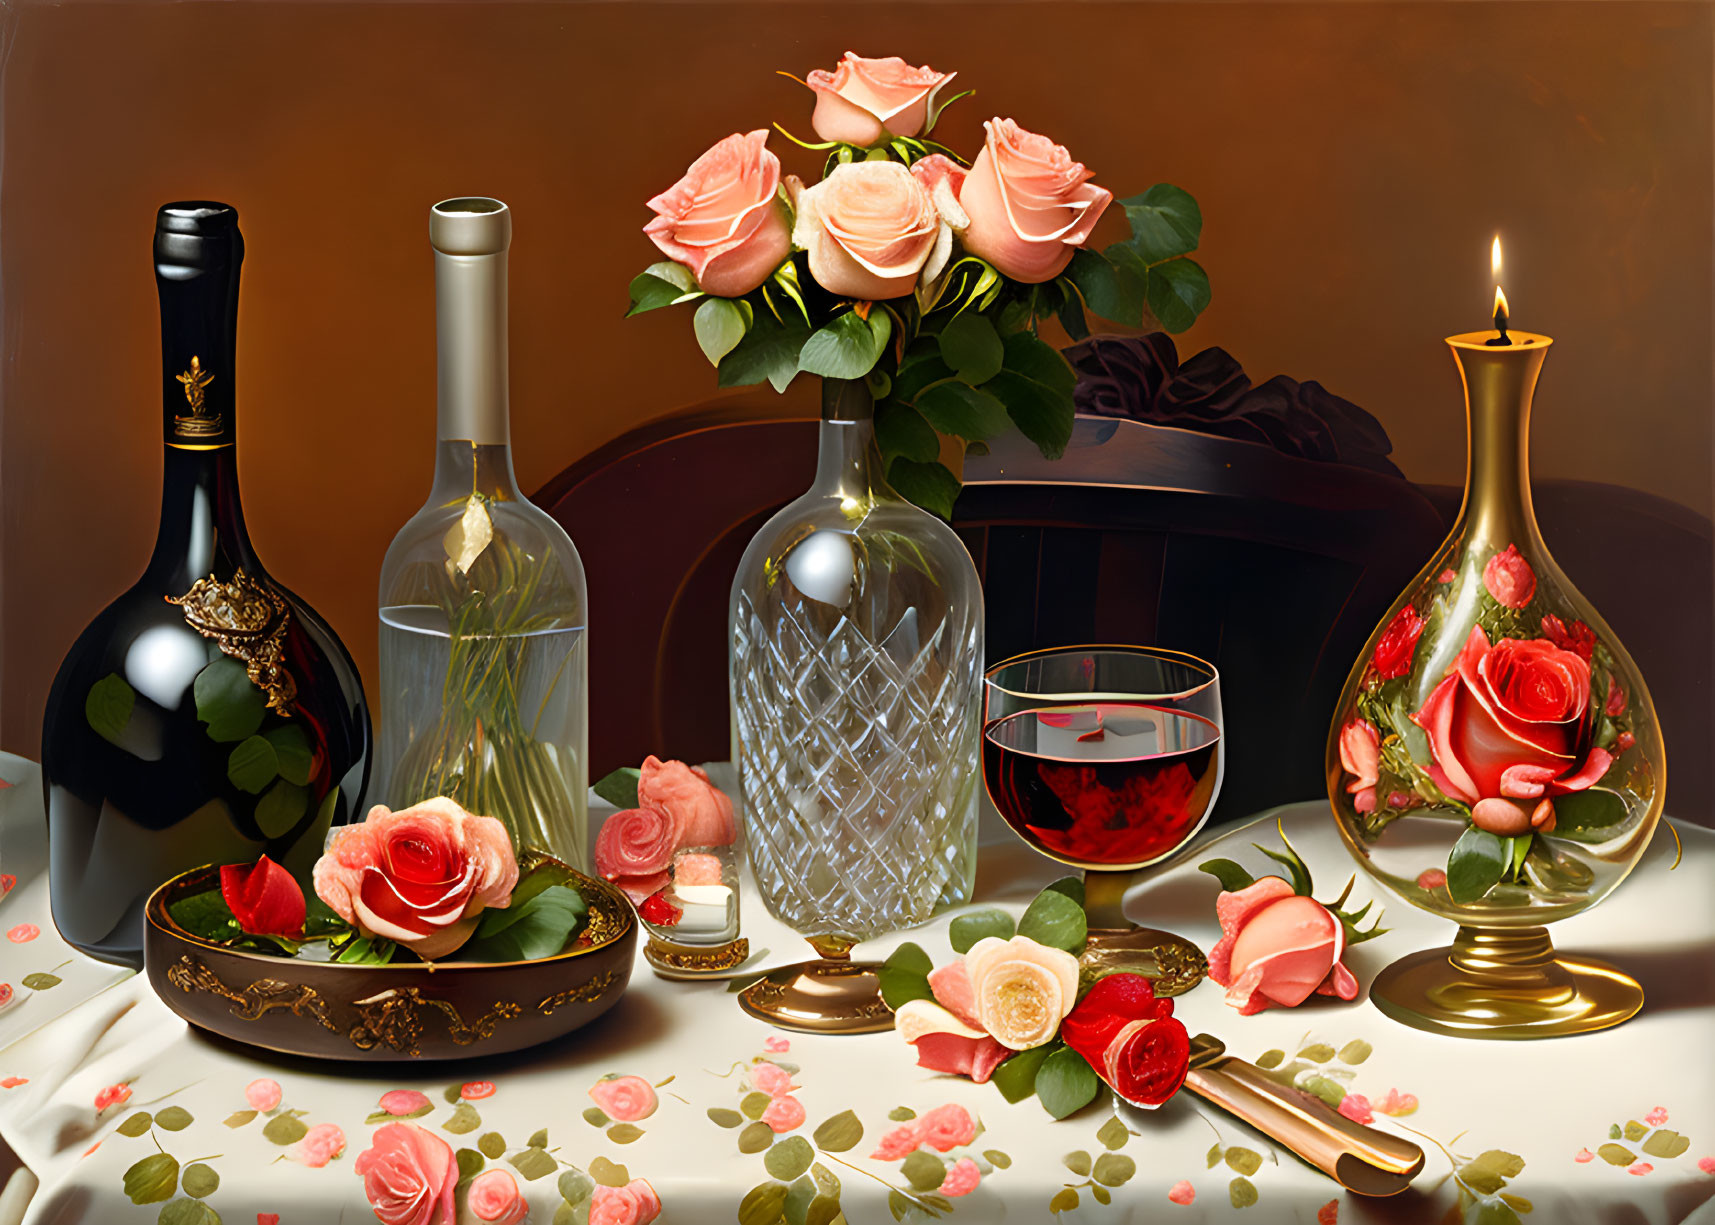 A dining table, a bouquet of beautiful roses, a bo